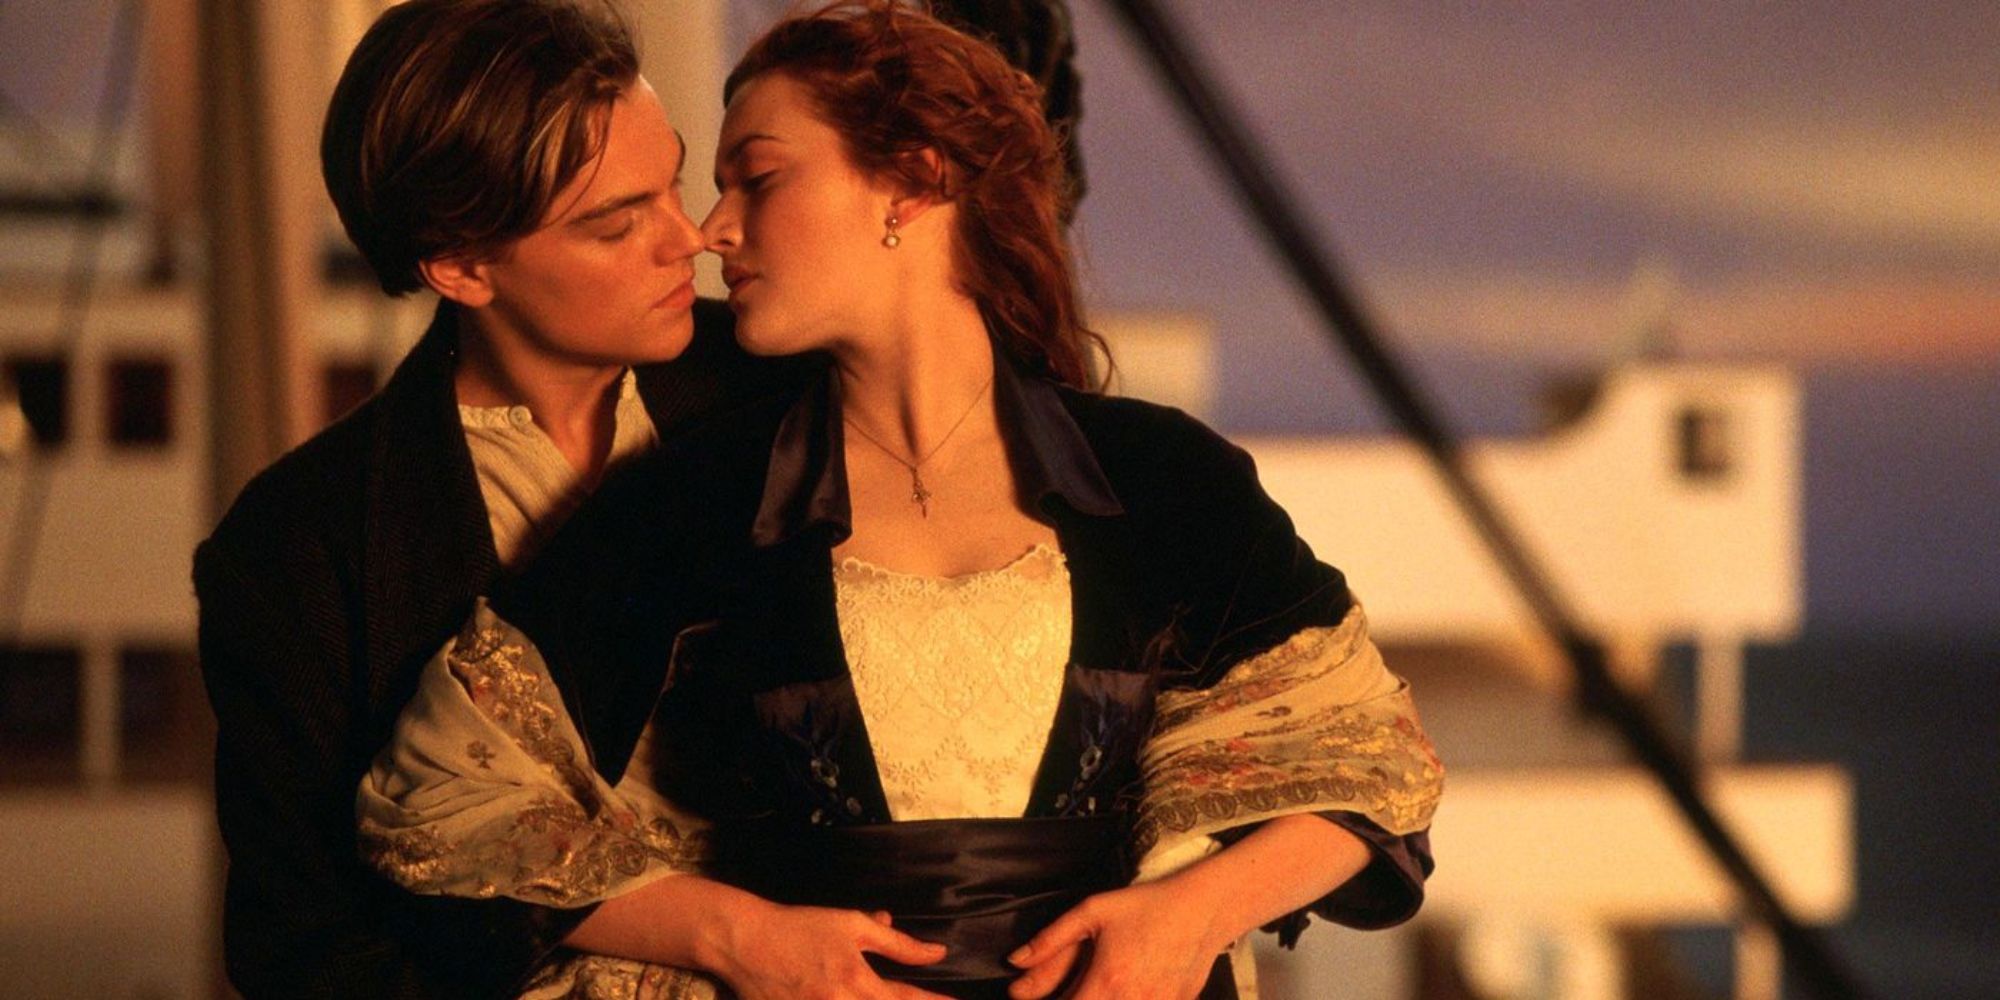 Leonardo DiCaprio and Kate Winselt as Jack and Rose sharing a romantic moment in Titanic